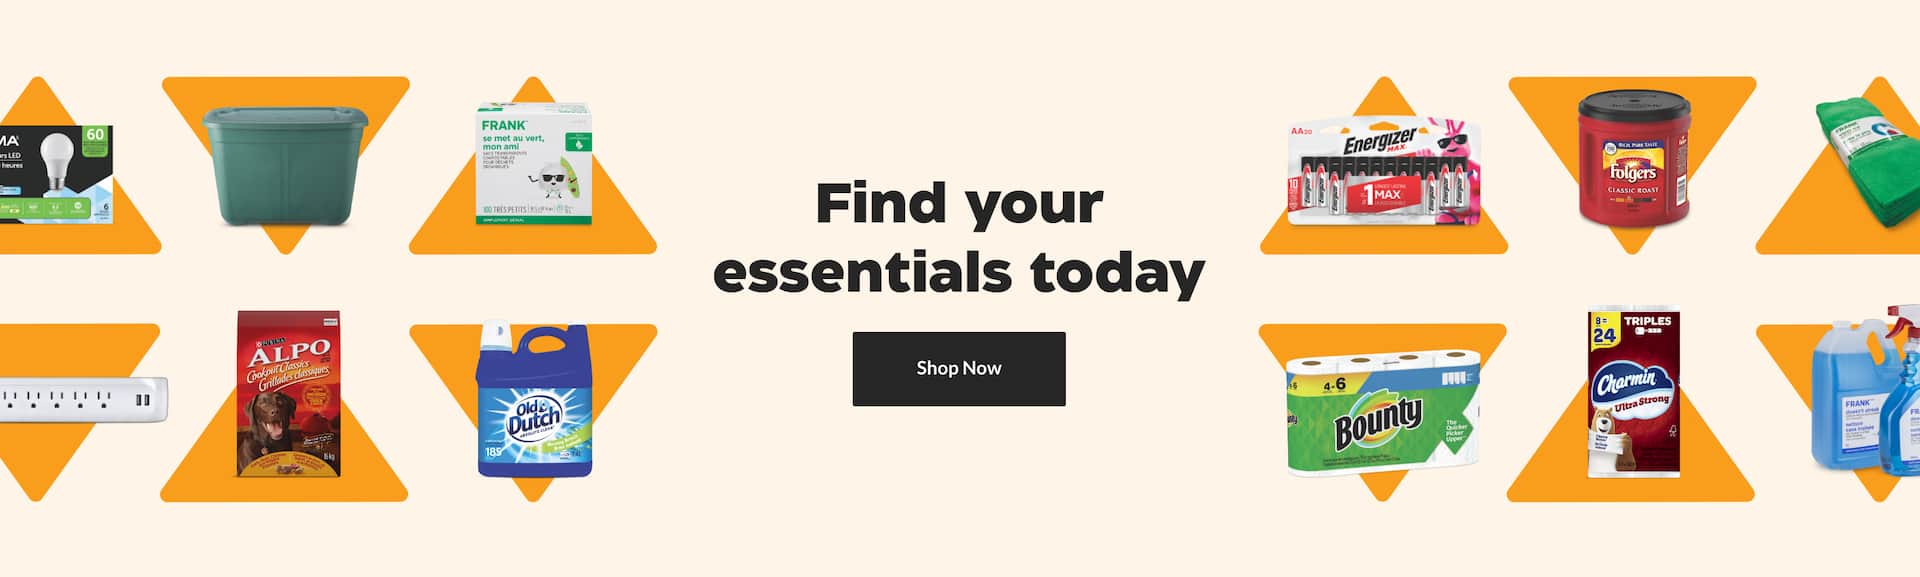 Various household products including Energizer batteries, Bounty paper towels and more around a “Find your essentials today